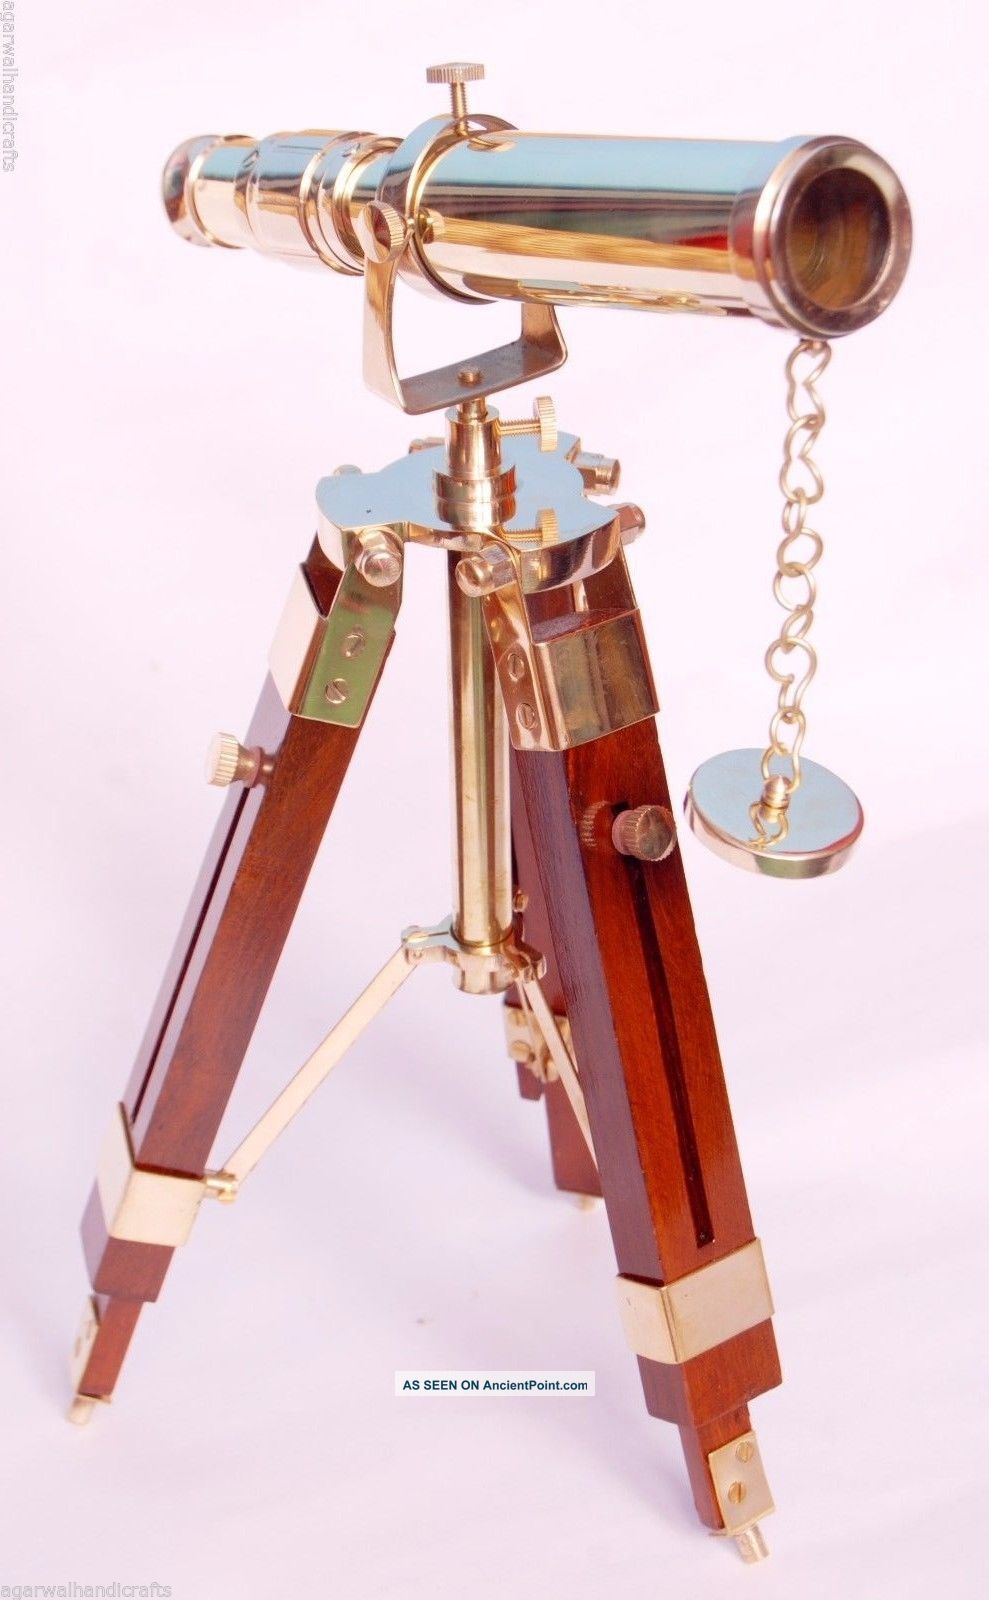 Nautical Collectible Single Barrel Brass Telescope With Wooden Tripod Stand Telescopes photo